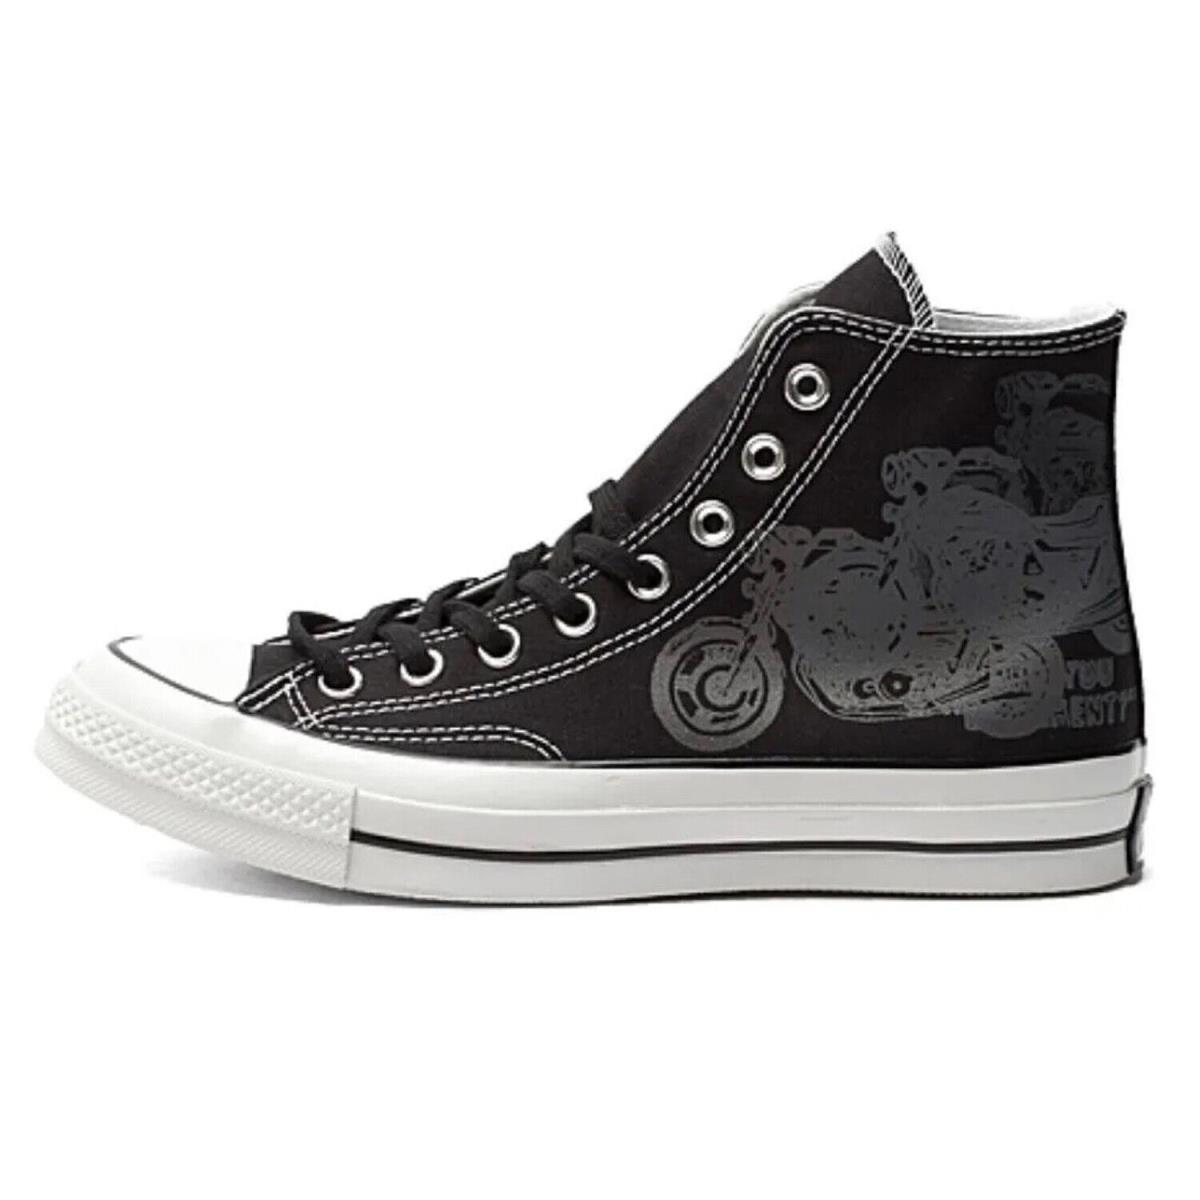 Converse CT All Star OX Andy Warhol Canvas Shoes Mens Size  147122C |  076677612518 - Converse shoes - Black | SporTipTop